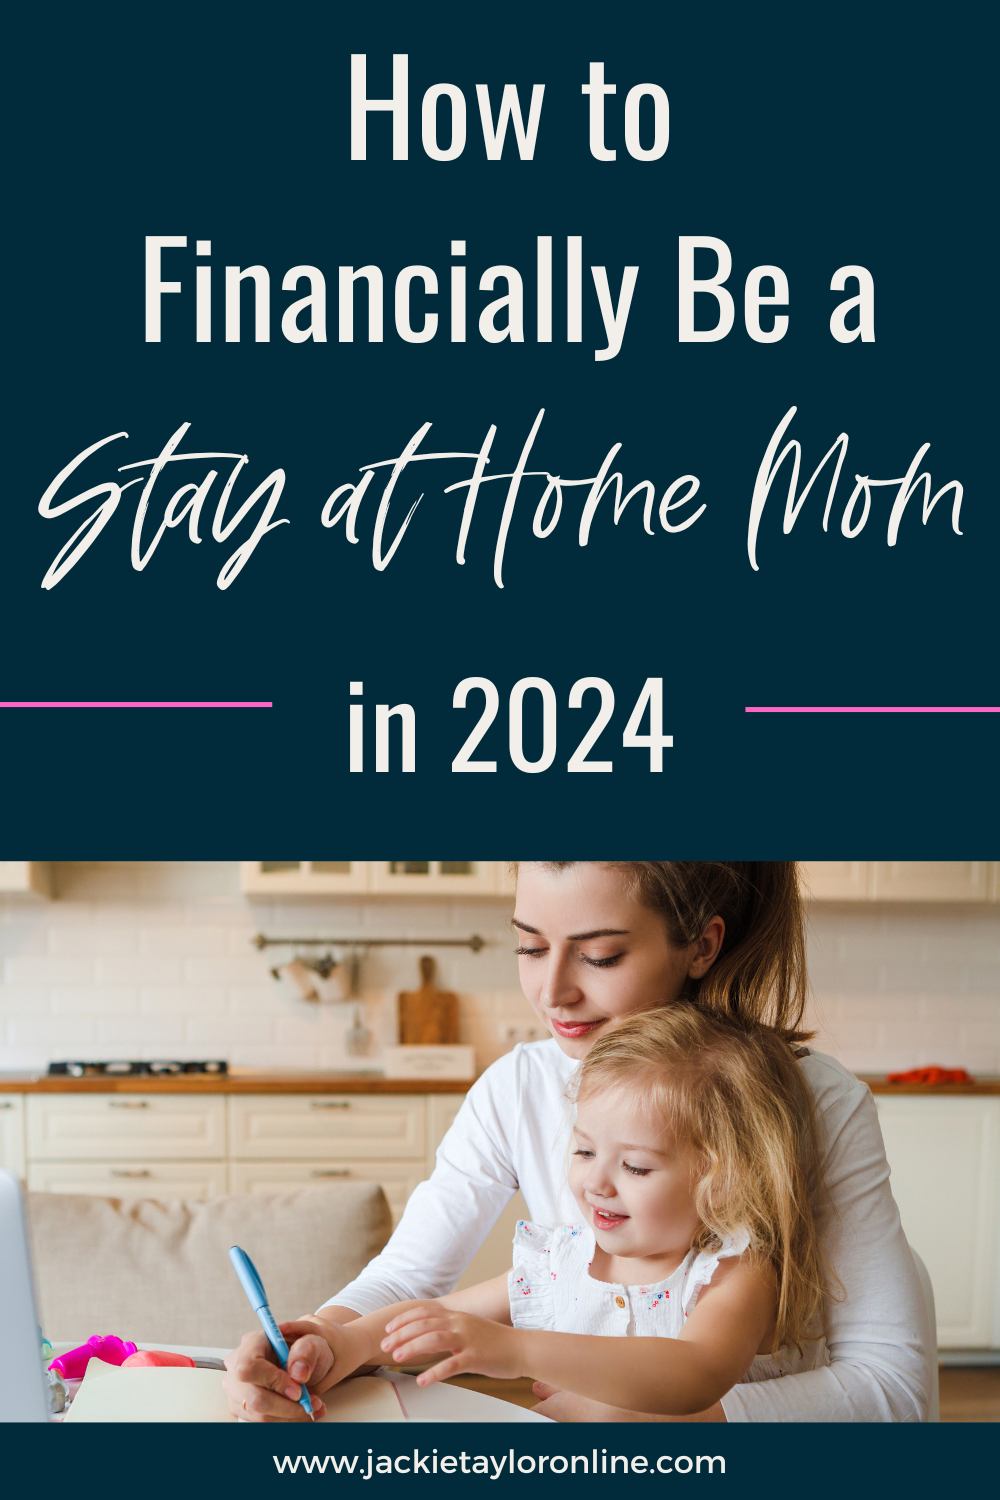 How to Financially Be a Stay at Home Mom